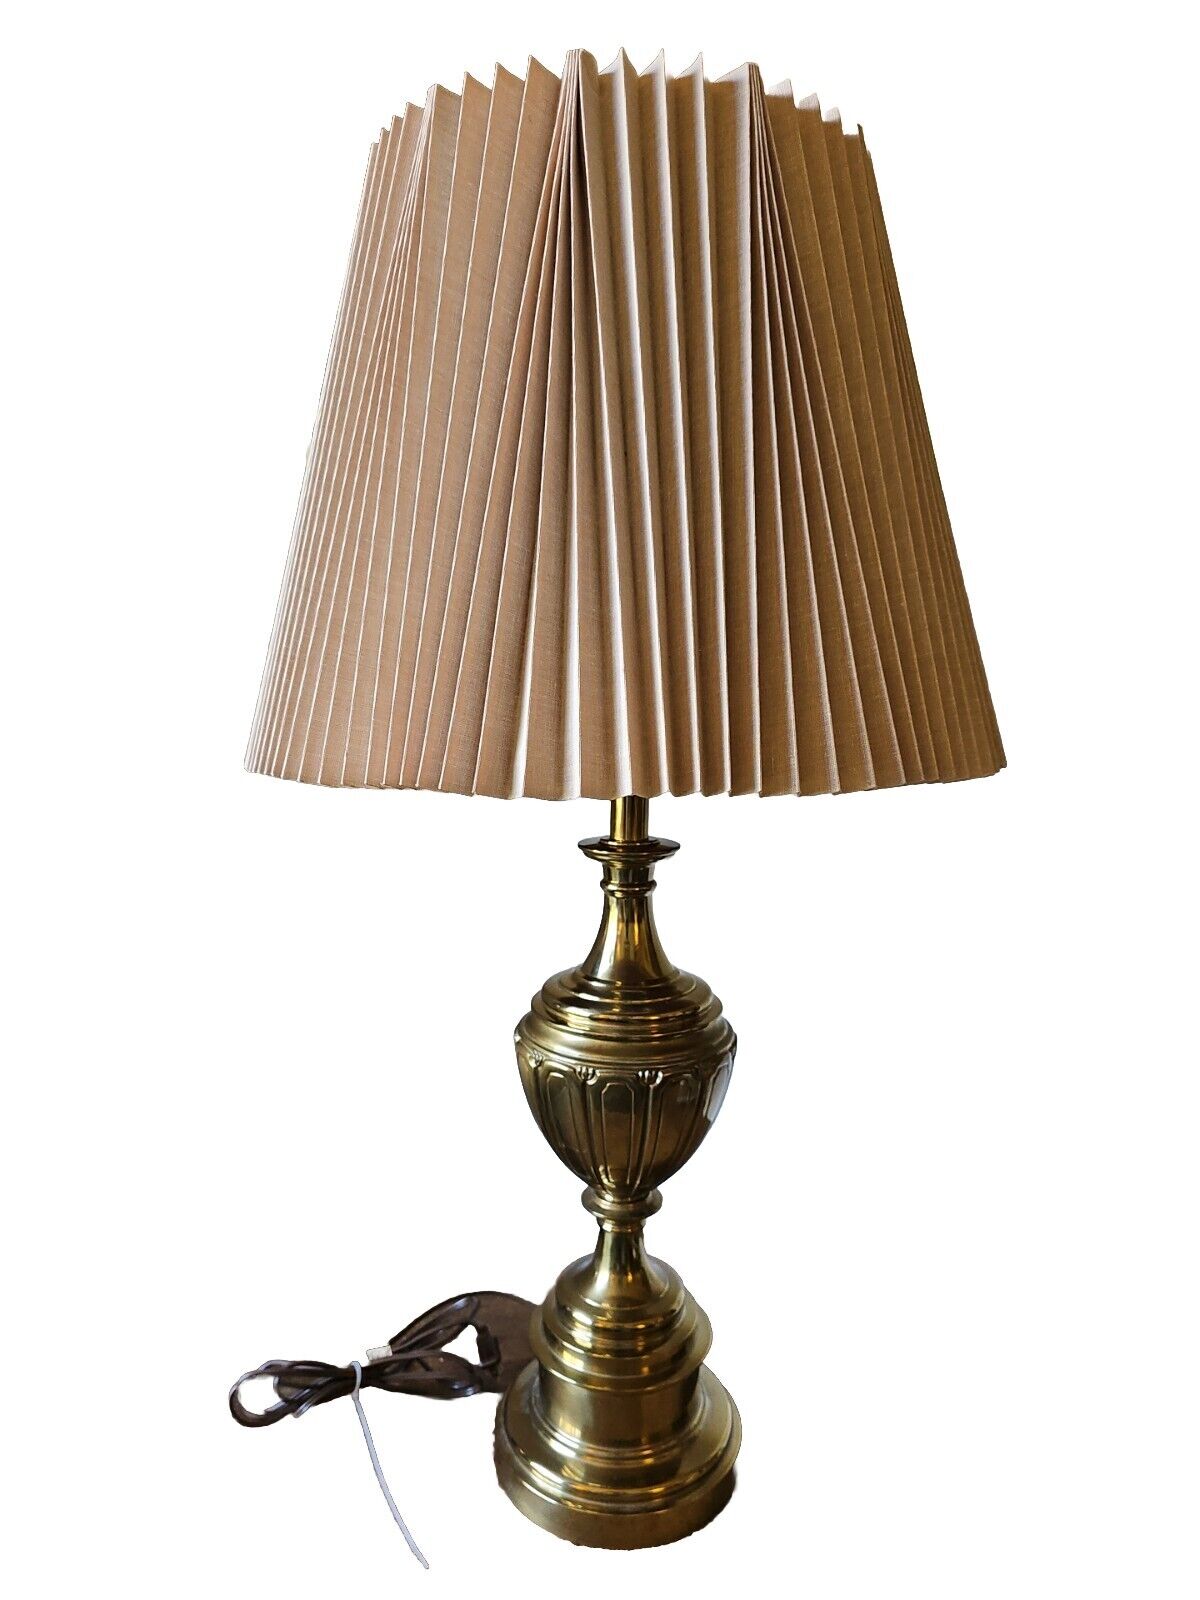 Vintage Stiffel Brass Trophy Style Teired Table Lamp With Original Crimped Shade